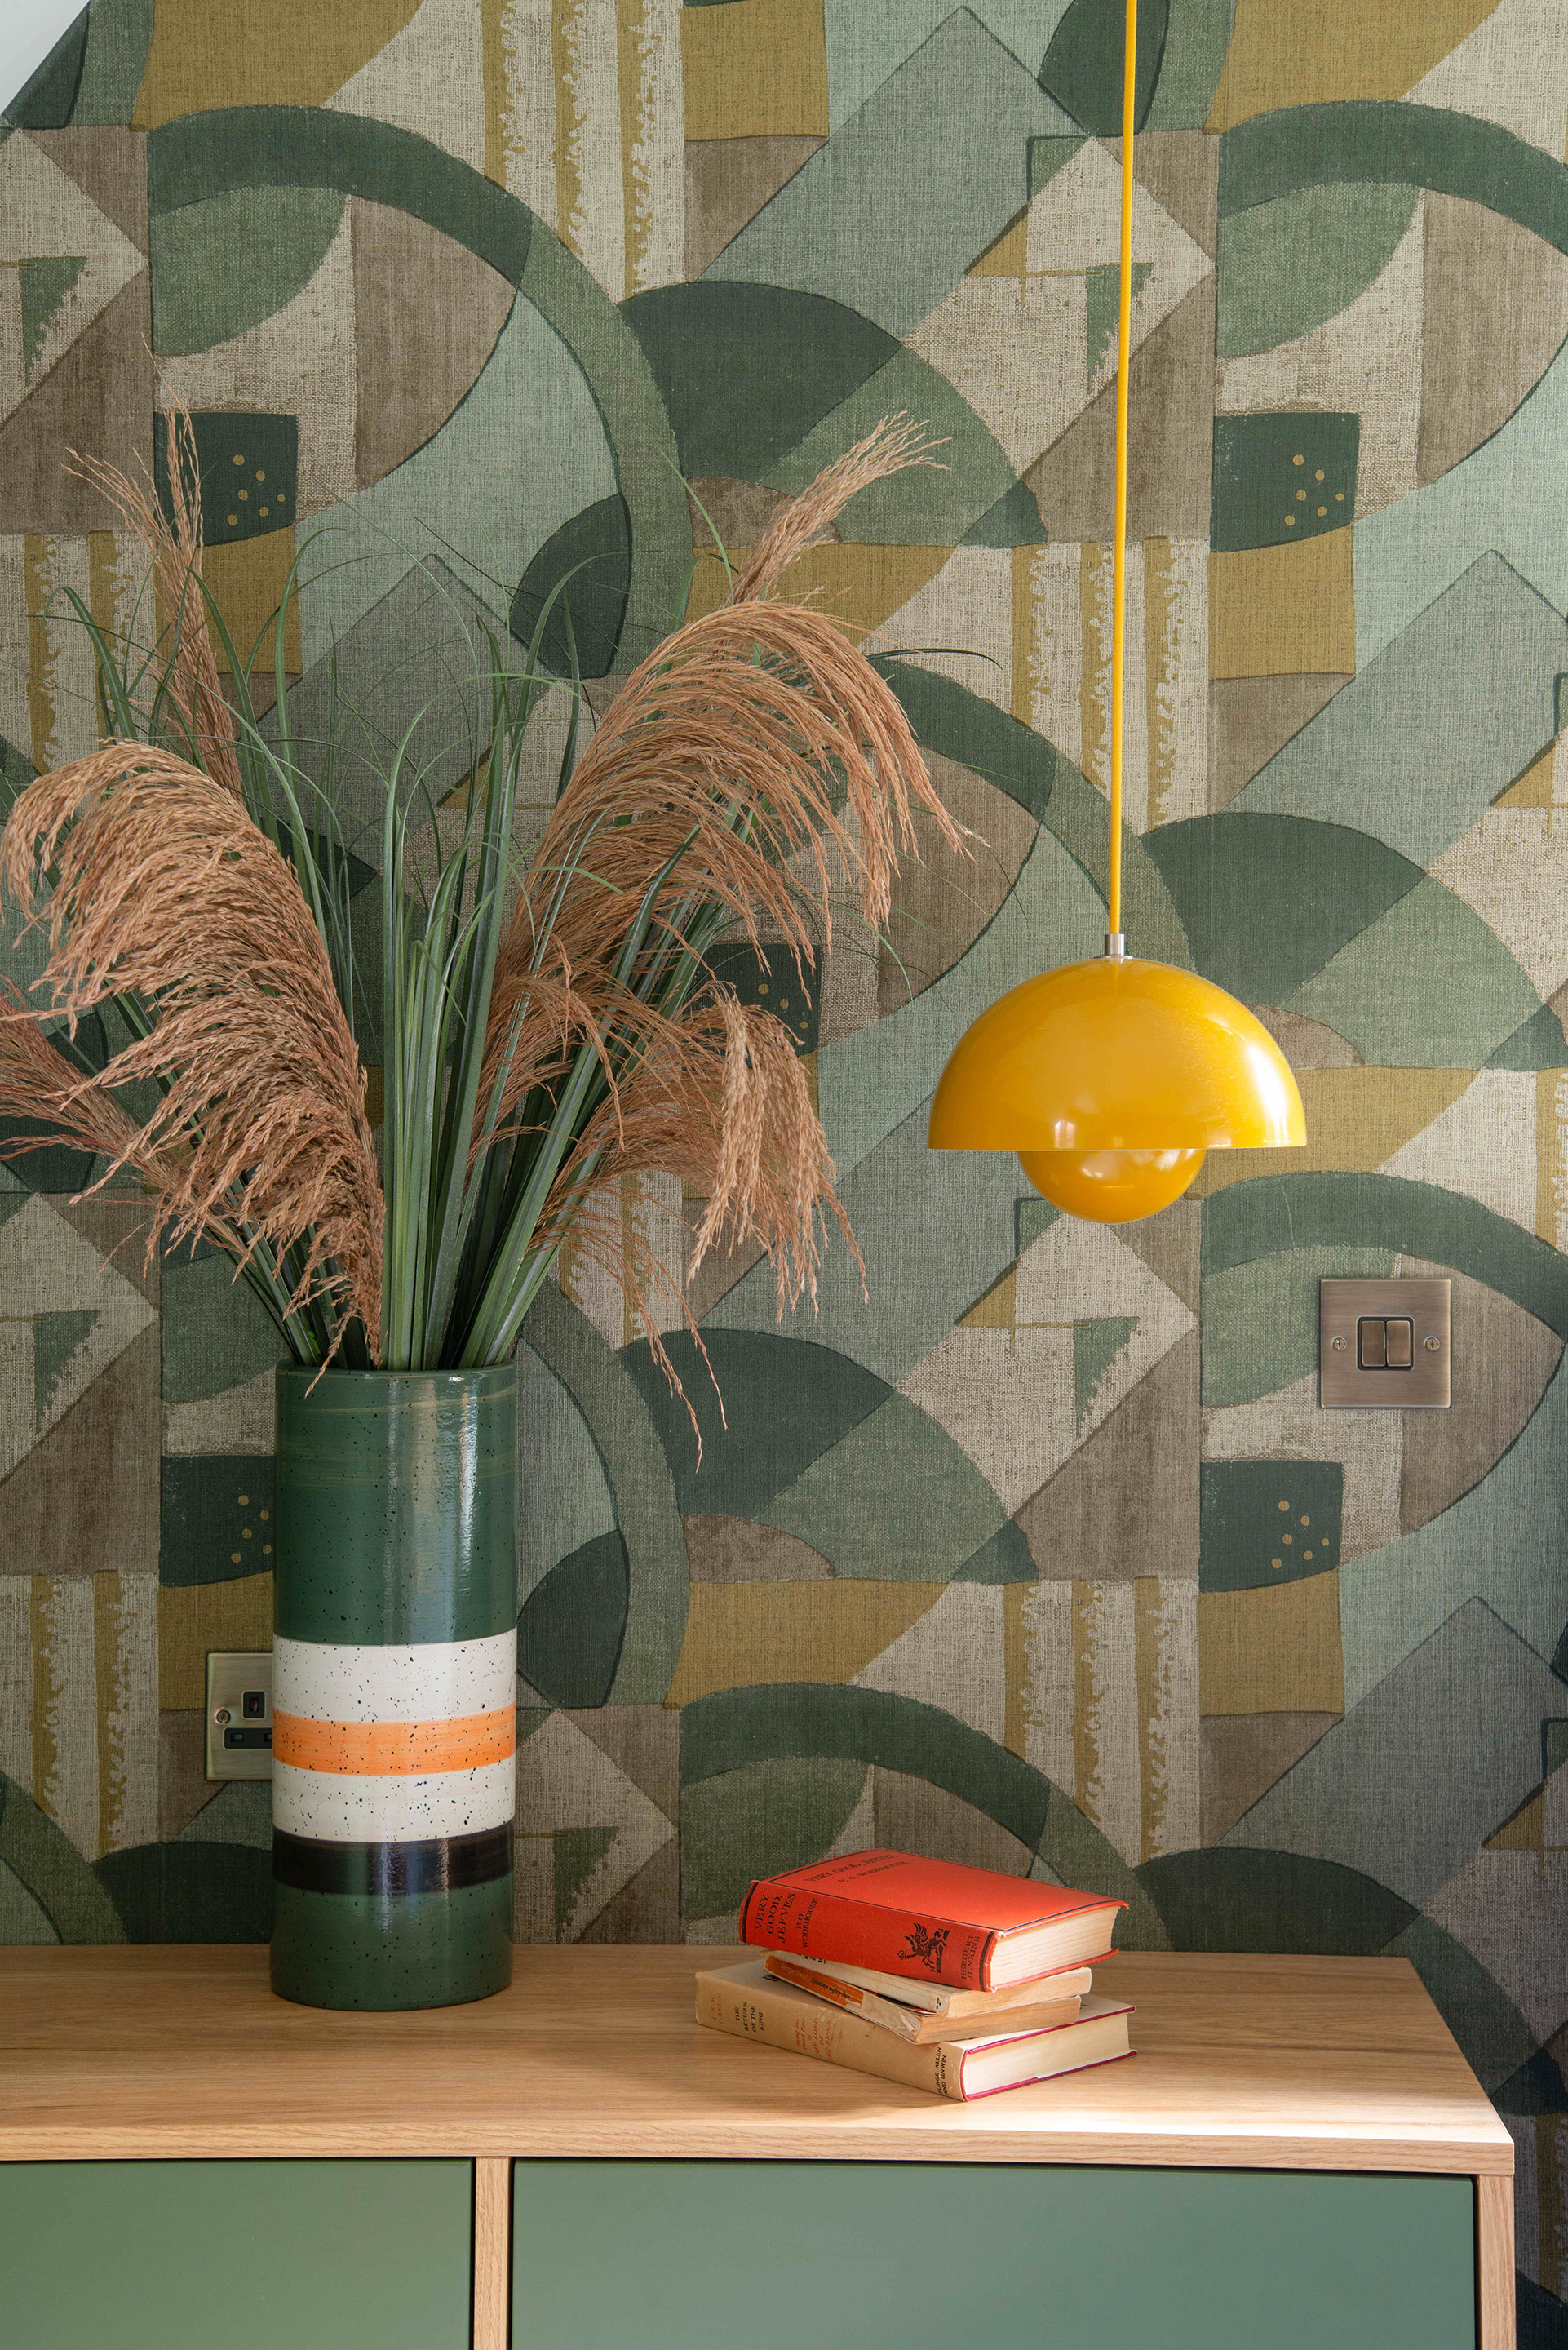 Close up of a bedside table and abstract wallpaper in a mid-century style bedroom. Wallpaper is green and golds, with the bedside table in oak veneer and green drawer fronts. A bright yellow &tradition Flower Pot Pendant hangs above. 